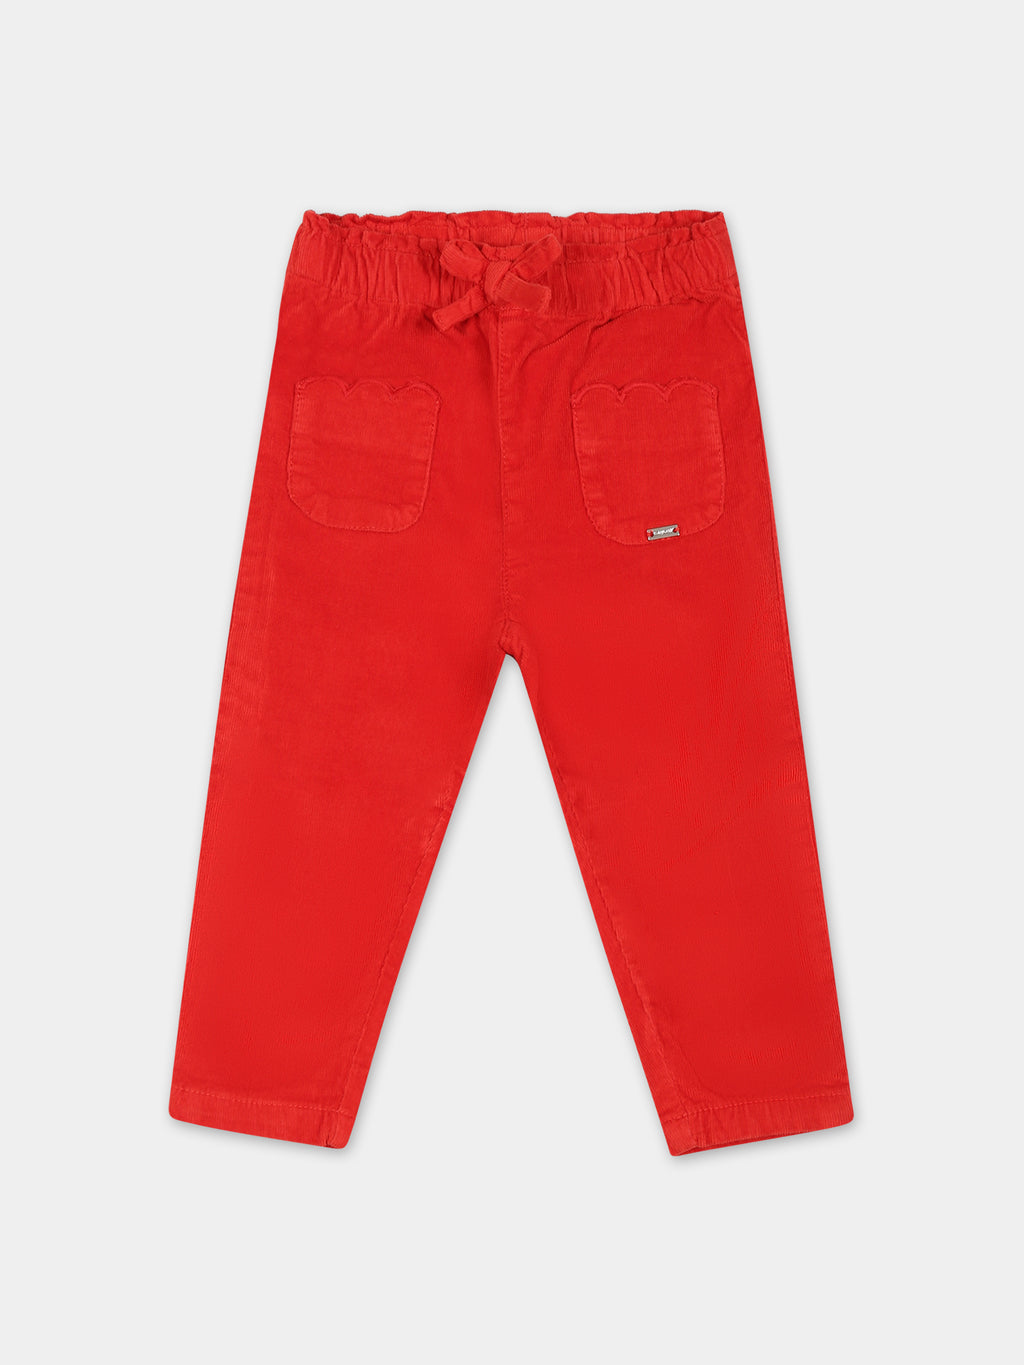 Red trousers fro baby girl with logo